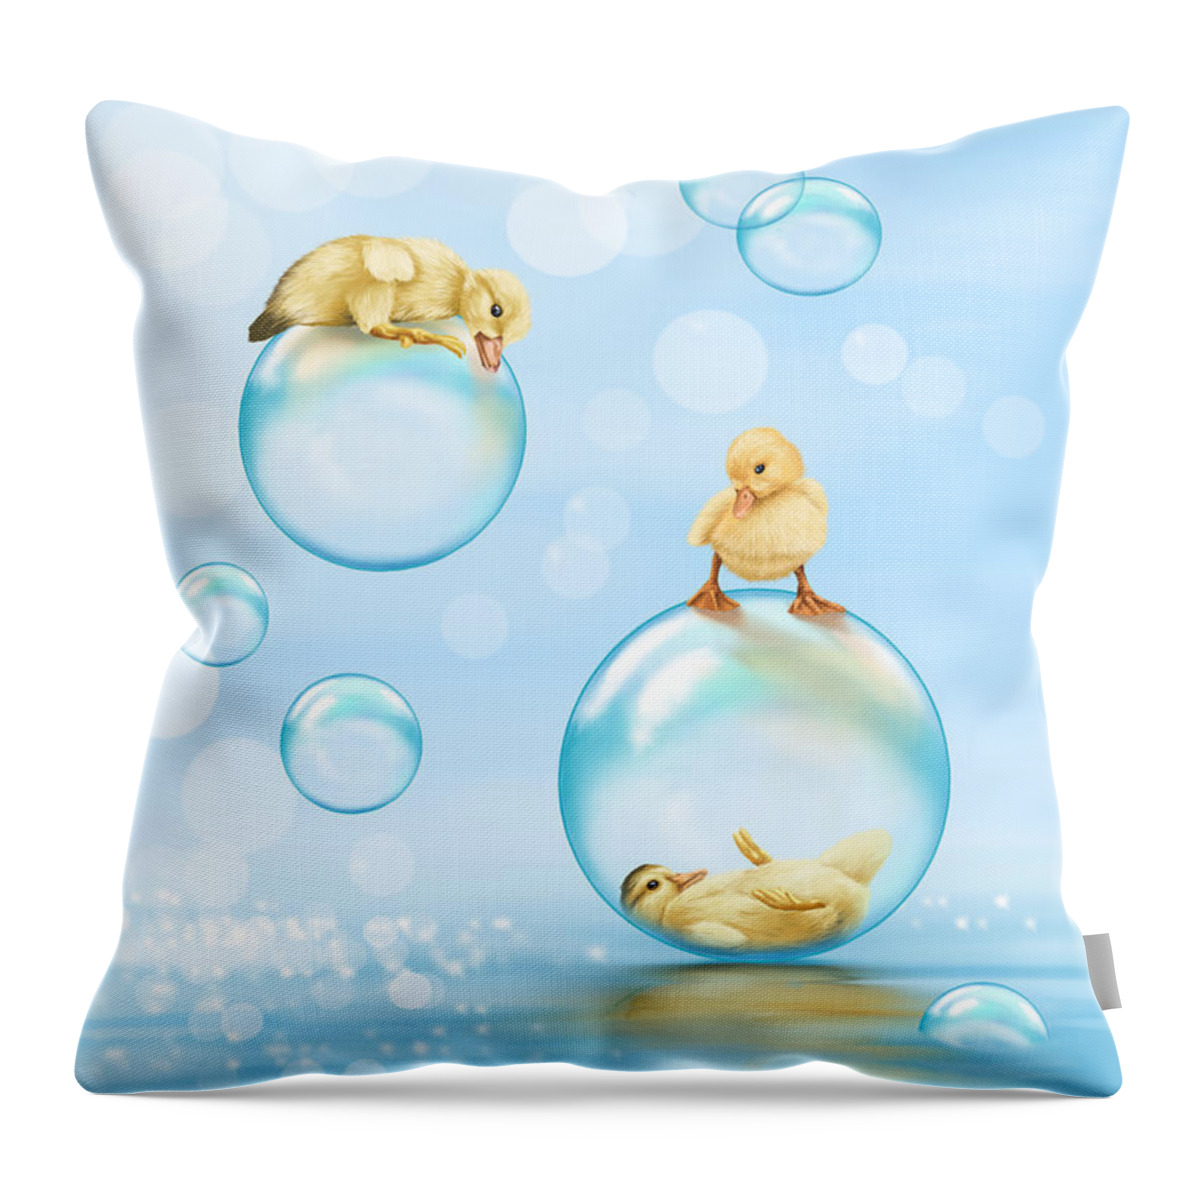 Ipad Throw Pillow featuring the painting Water games by Veronica Minozzi